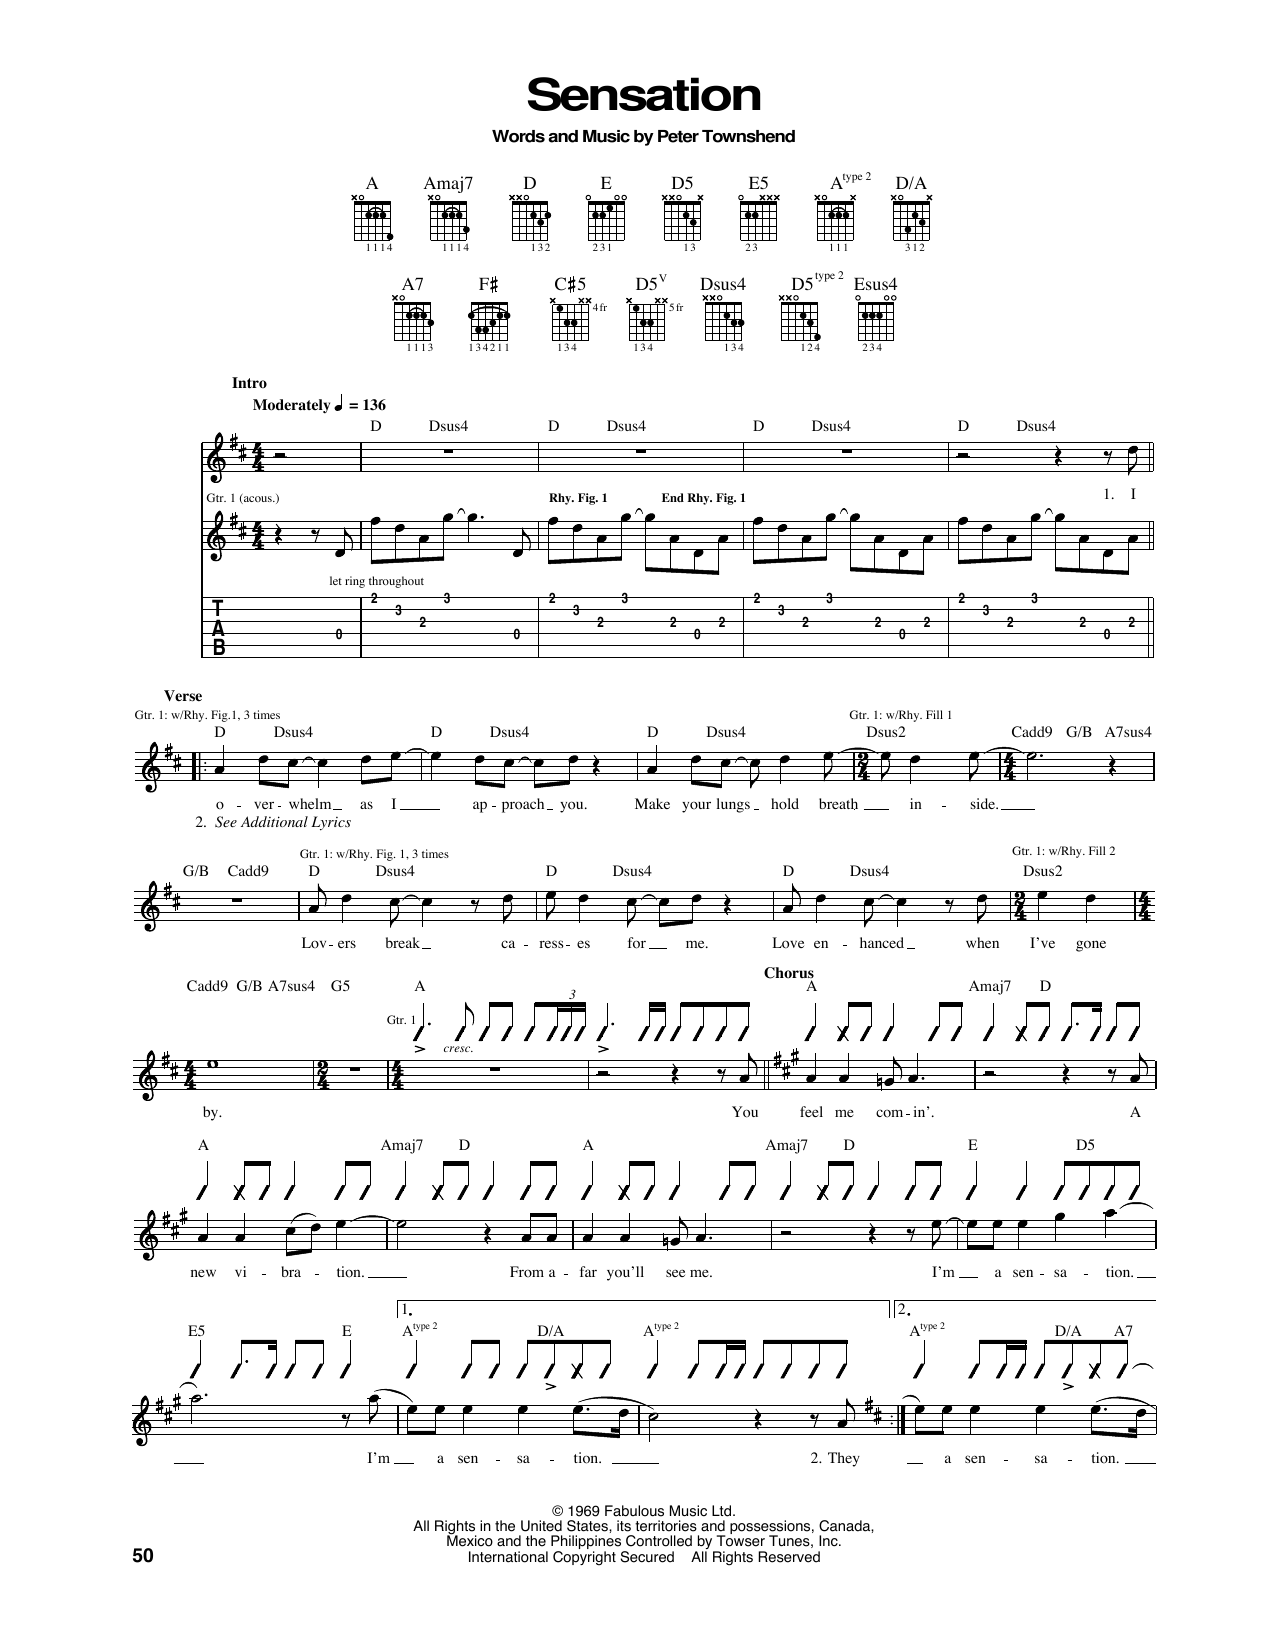 Download The Who Sensation Sheet Music